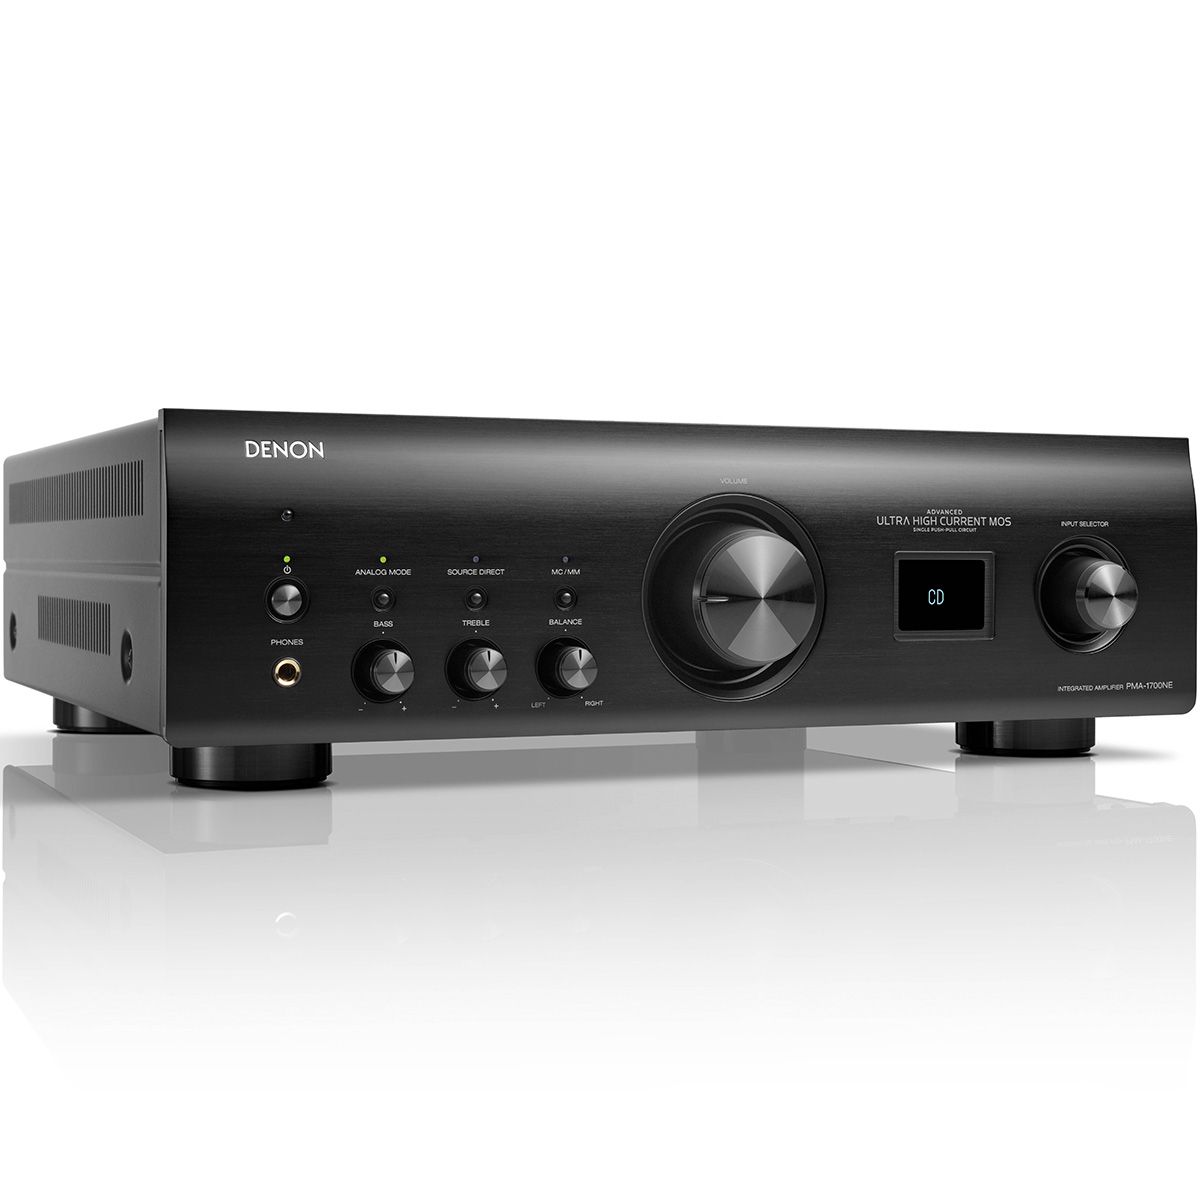 Front view of the black Denon PMA-1700 at a right angle